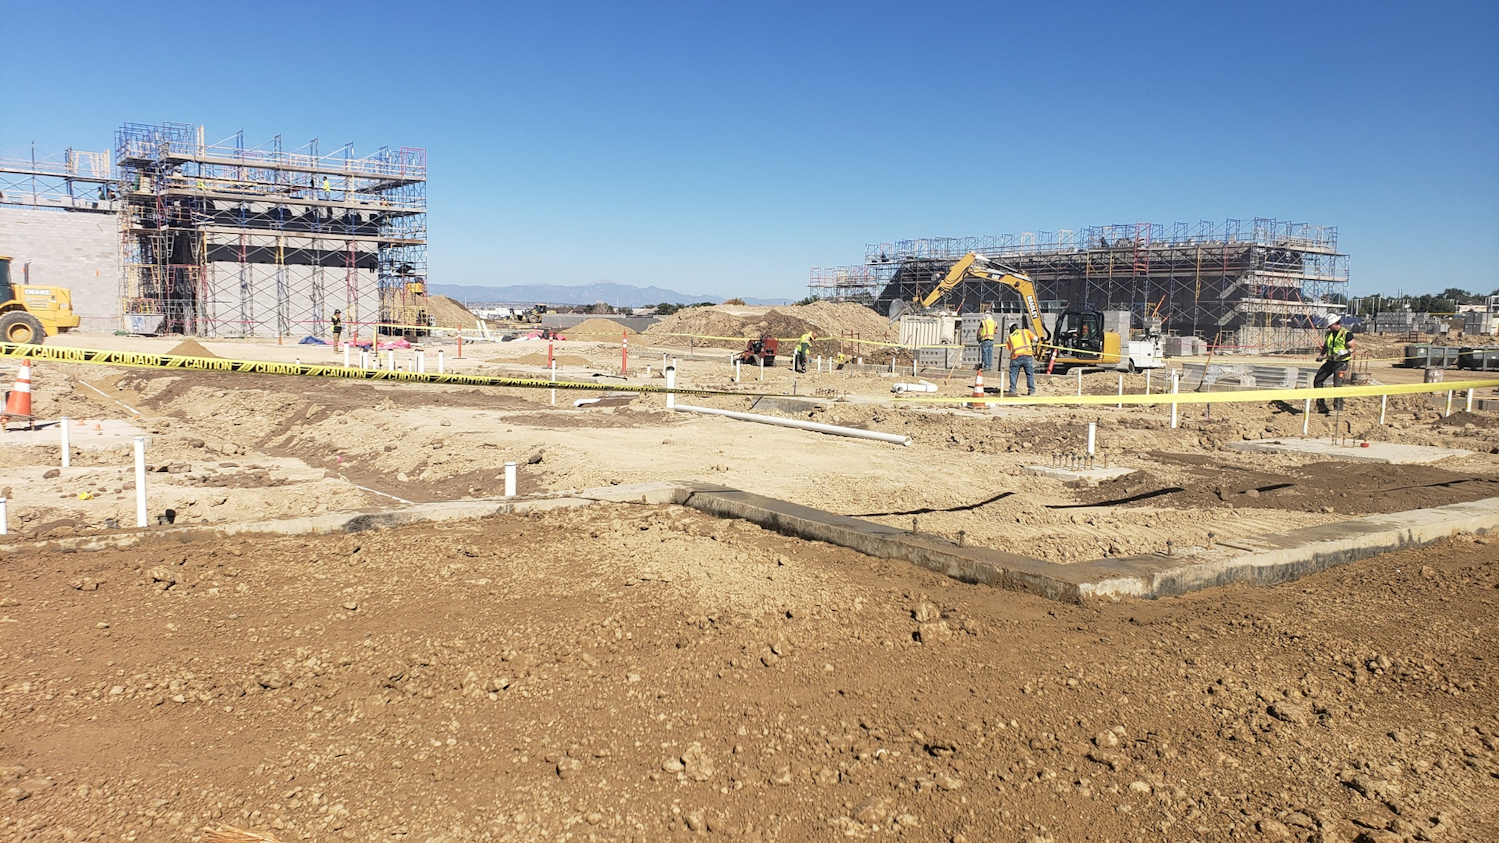 Centennial High School Construction Site | Fall 2021: Early stages of building at the site in Pueblo, Colorado. White pipe is PVC for the school’s underground sanitary system. In the background, block walls for different sections of the school are being erected. The two-story, 185,000-square-foot building broke ground in the spring of 2021 and is slated for completion in 2023.